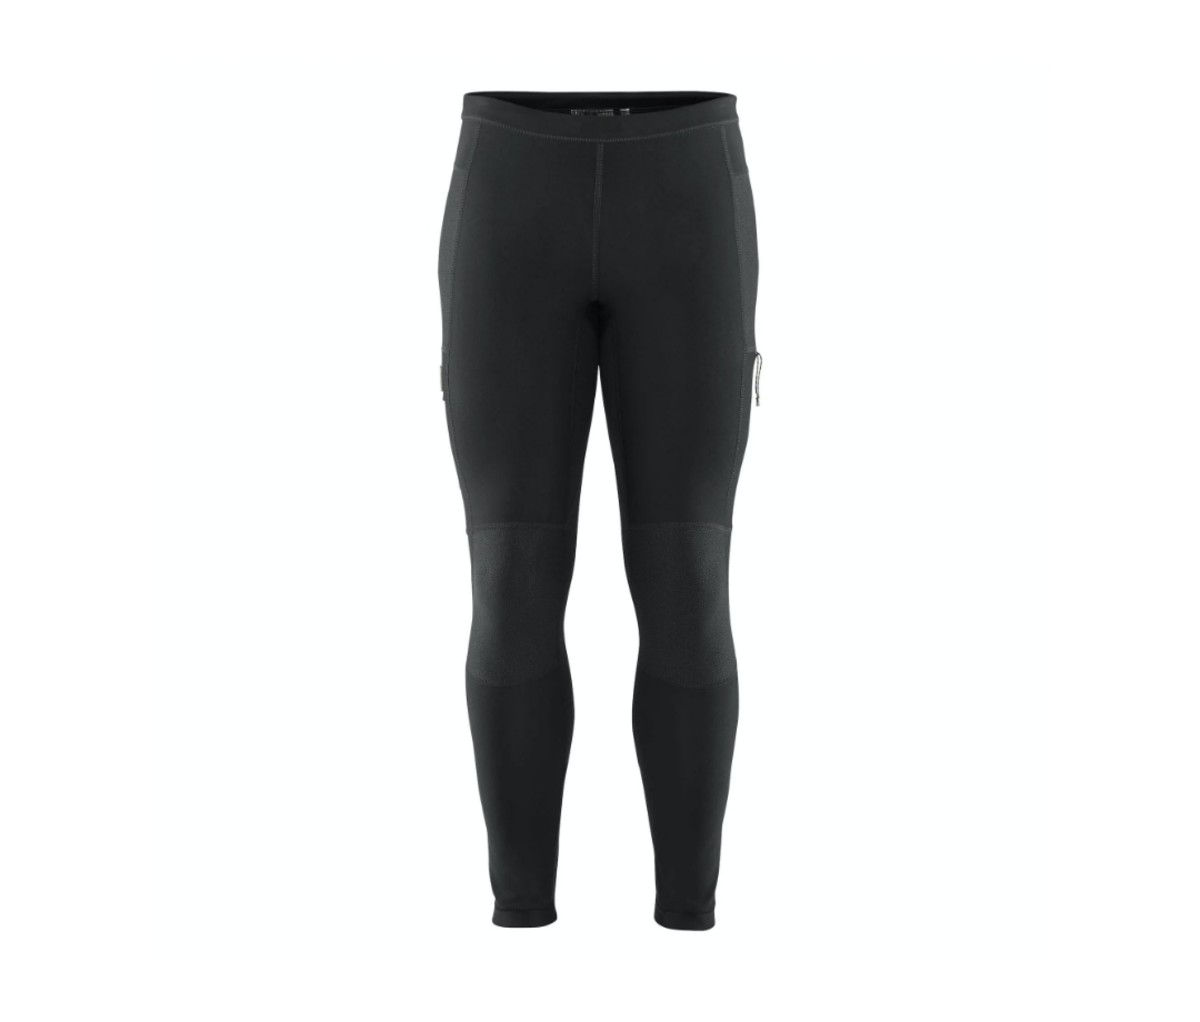 Under Armour Leggings. Find Tights for Men, Women and Kids in